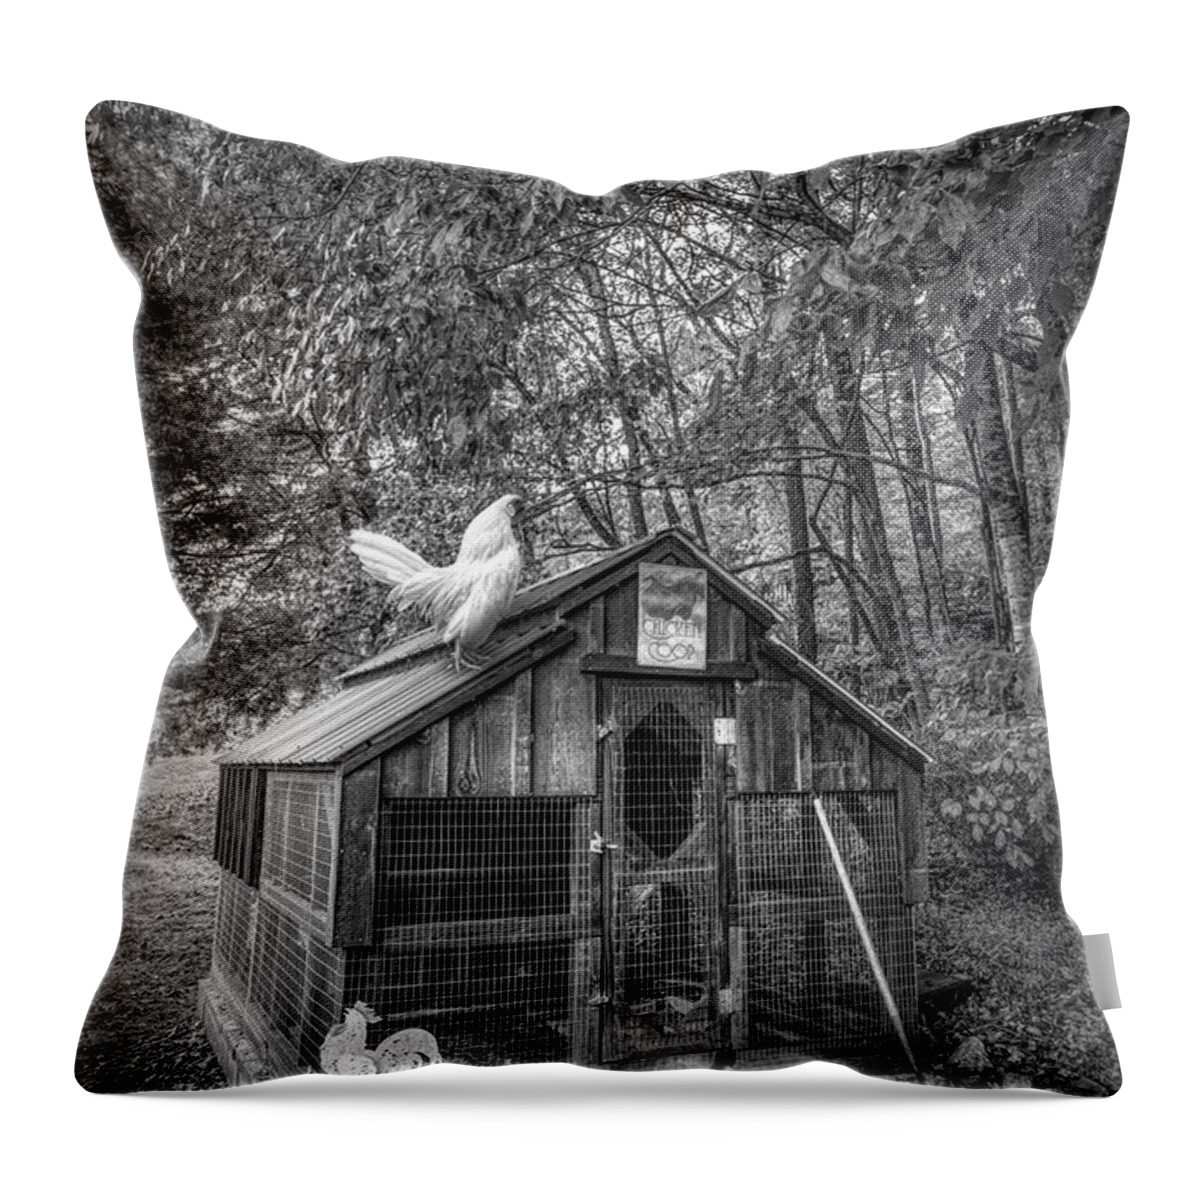 Animals Throw Pillow featuring the photograph Country Chicken Coop Black and White by Debra and Dave Vanderlaan